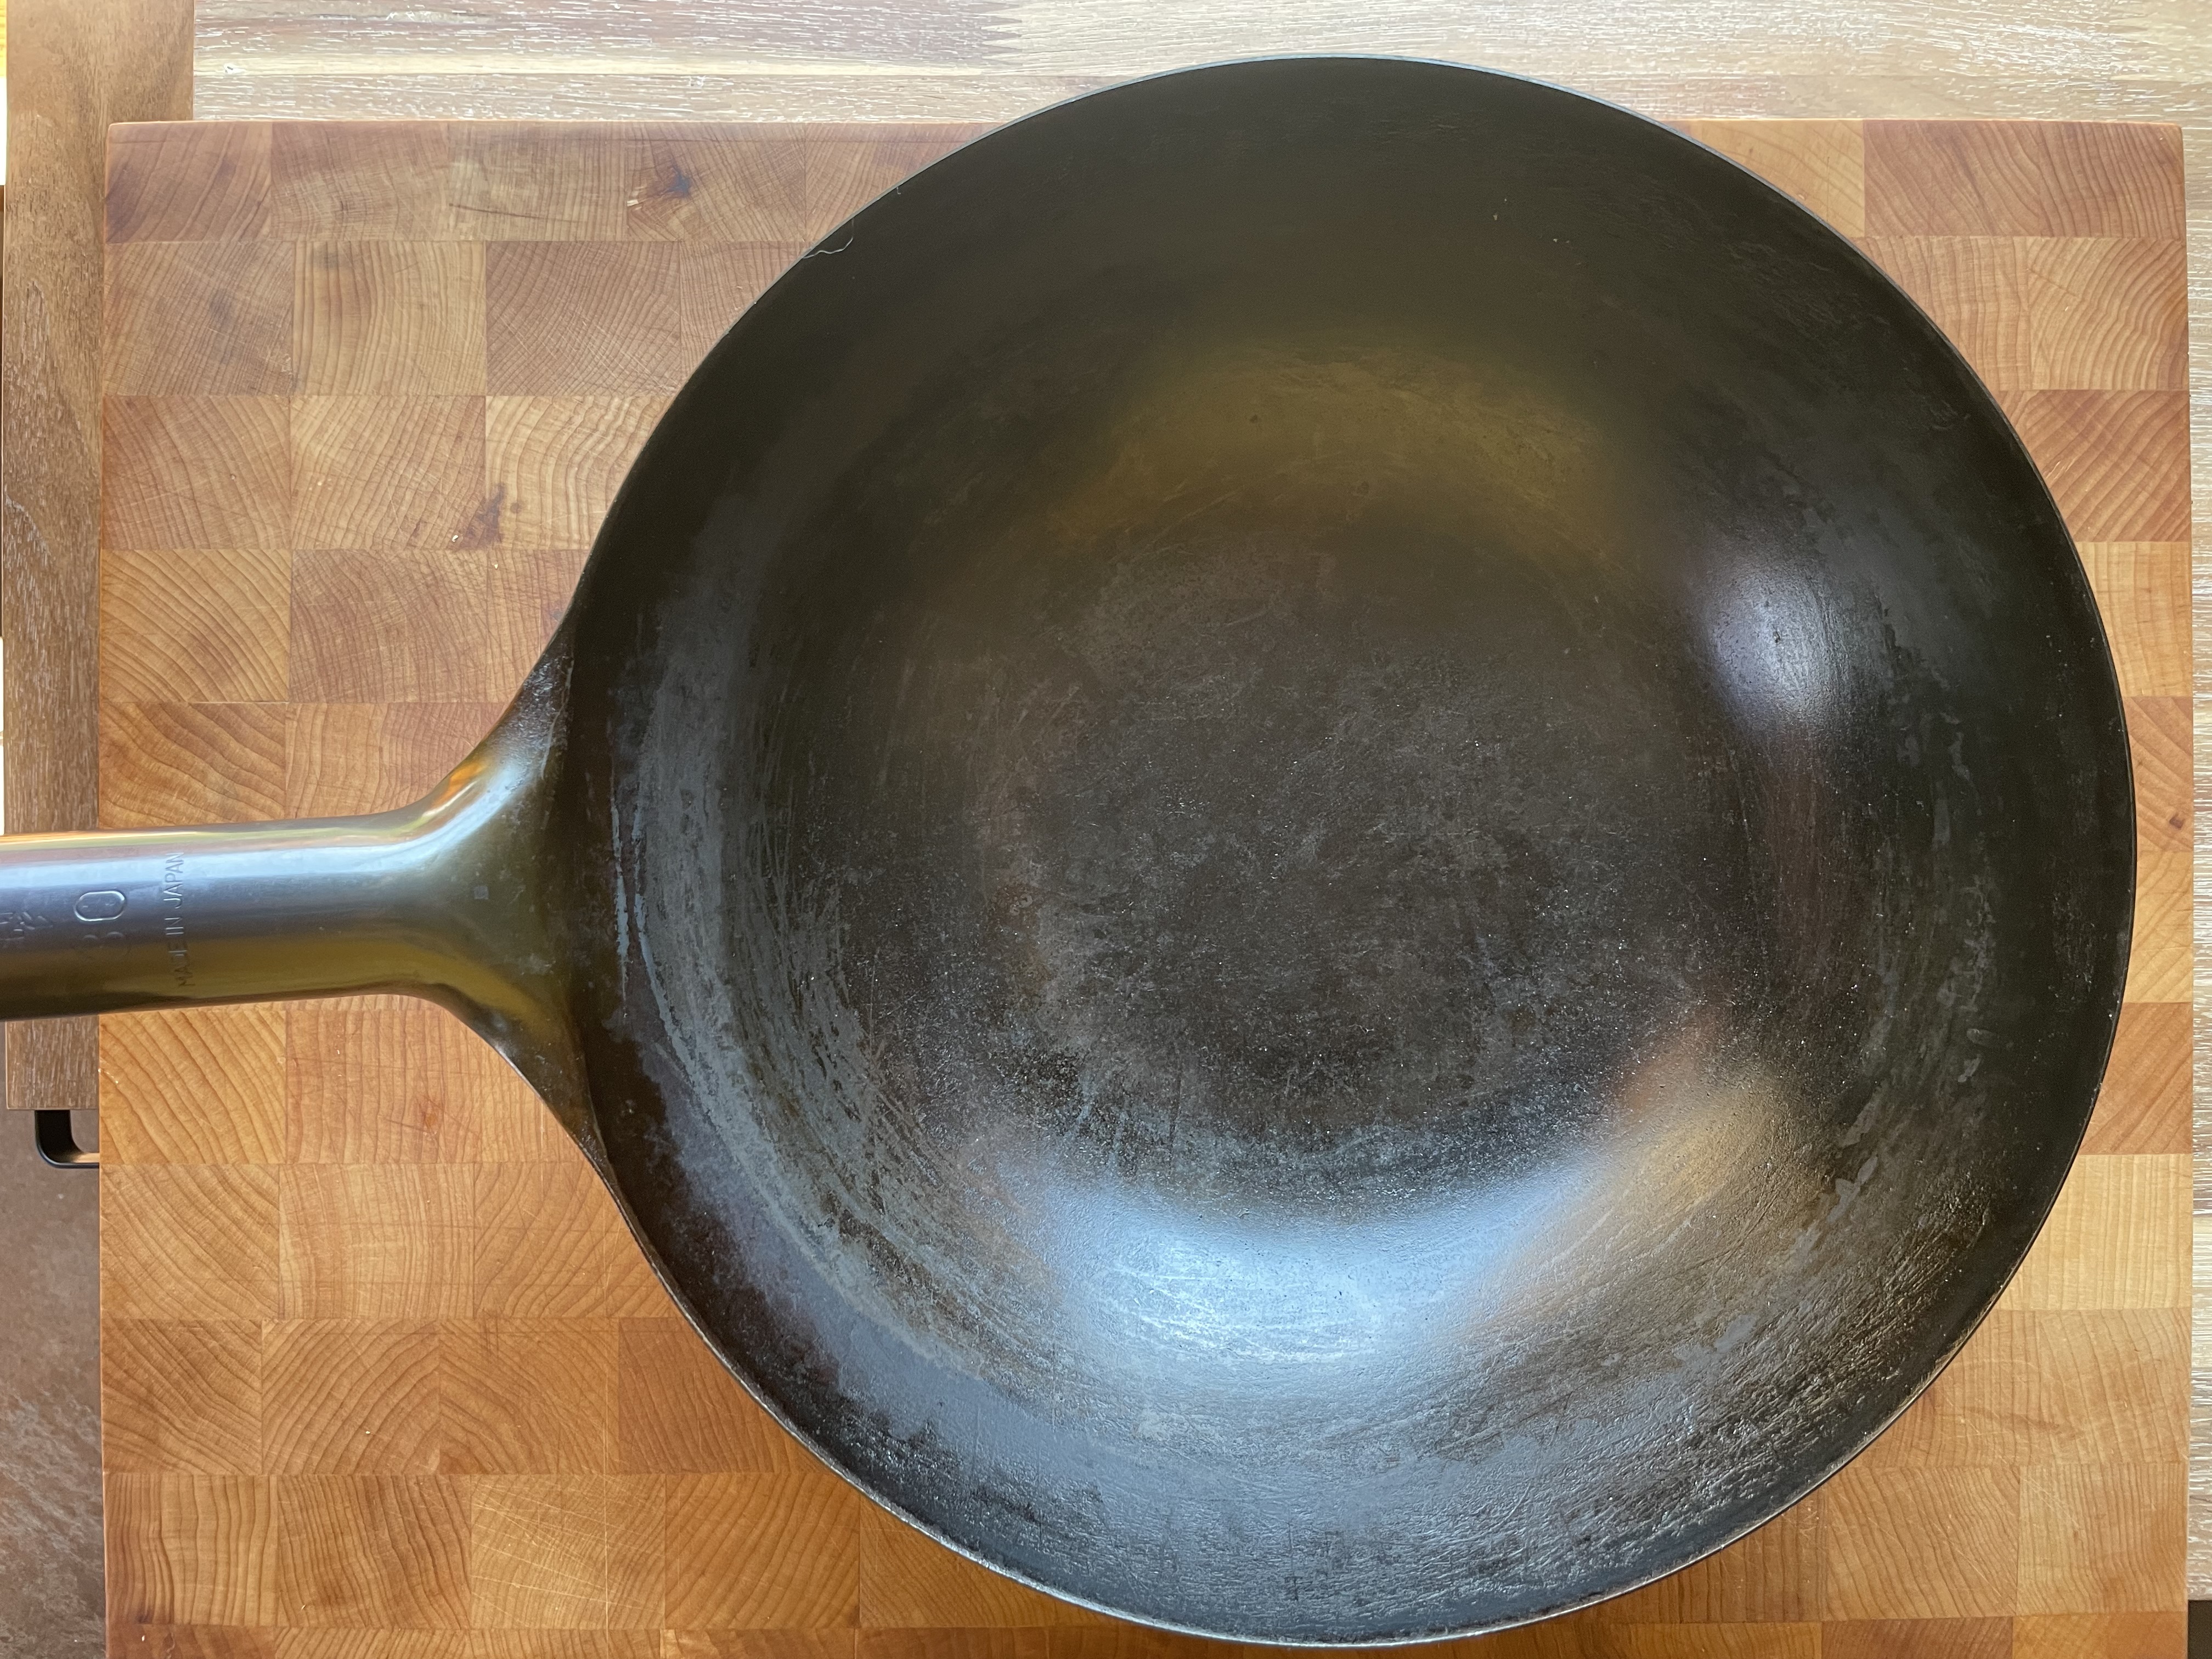 One Pan to Rule them All: The Wok